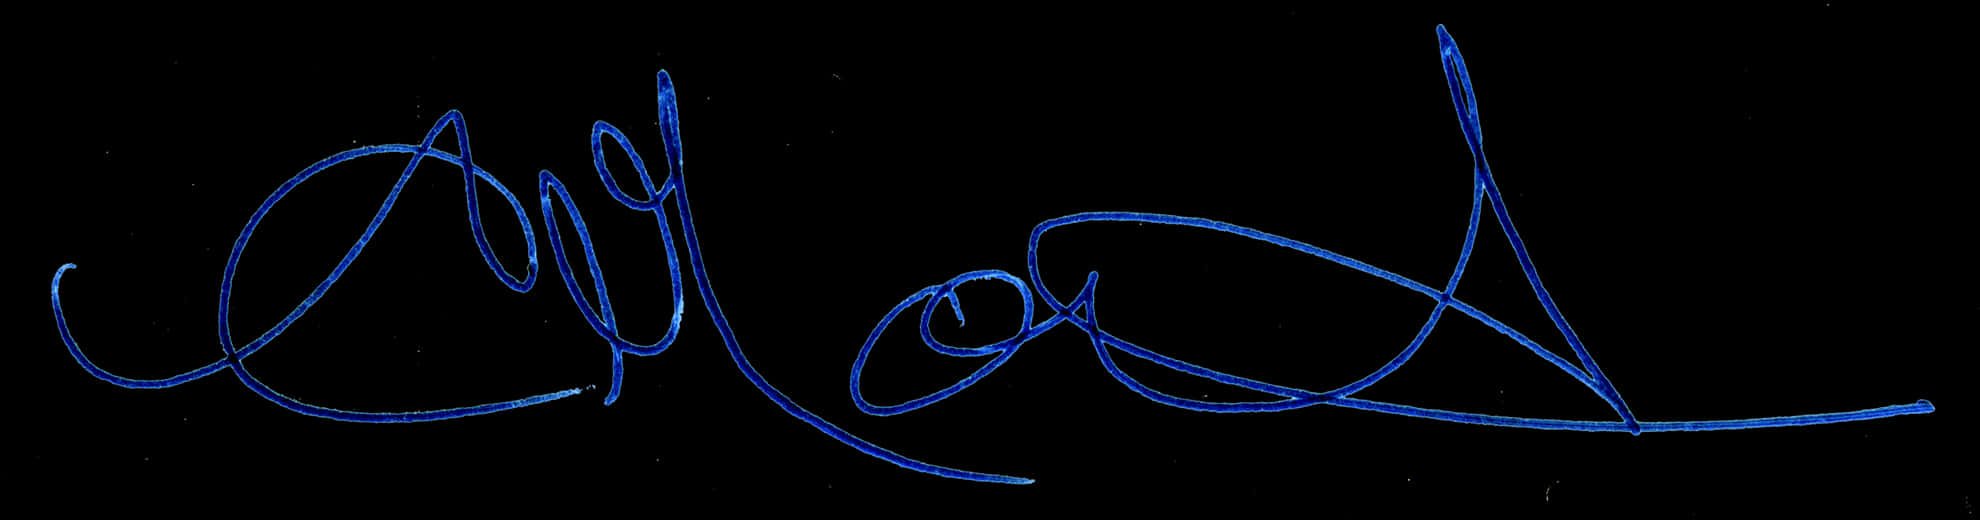 A Blue Light Painting On A Black Background